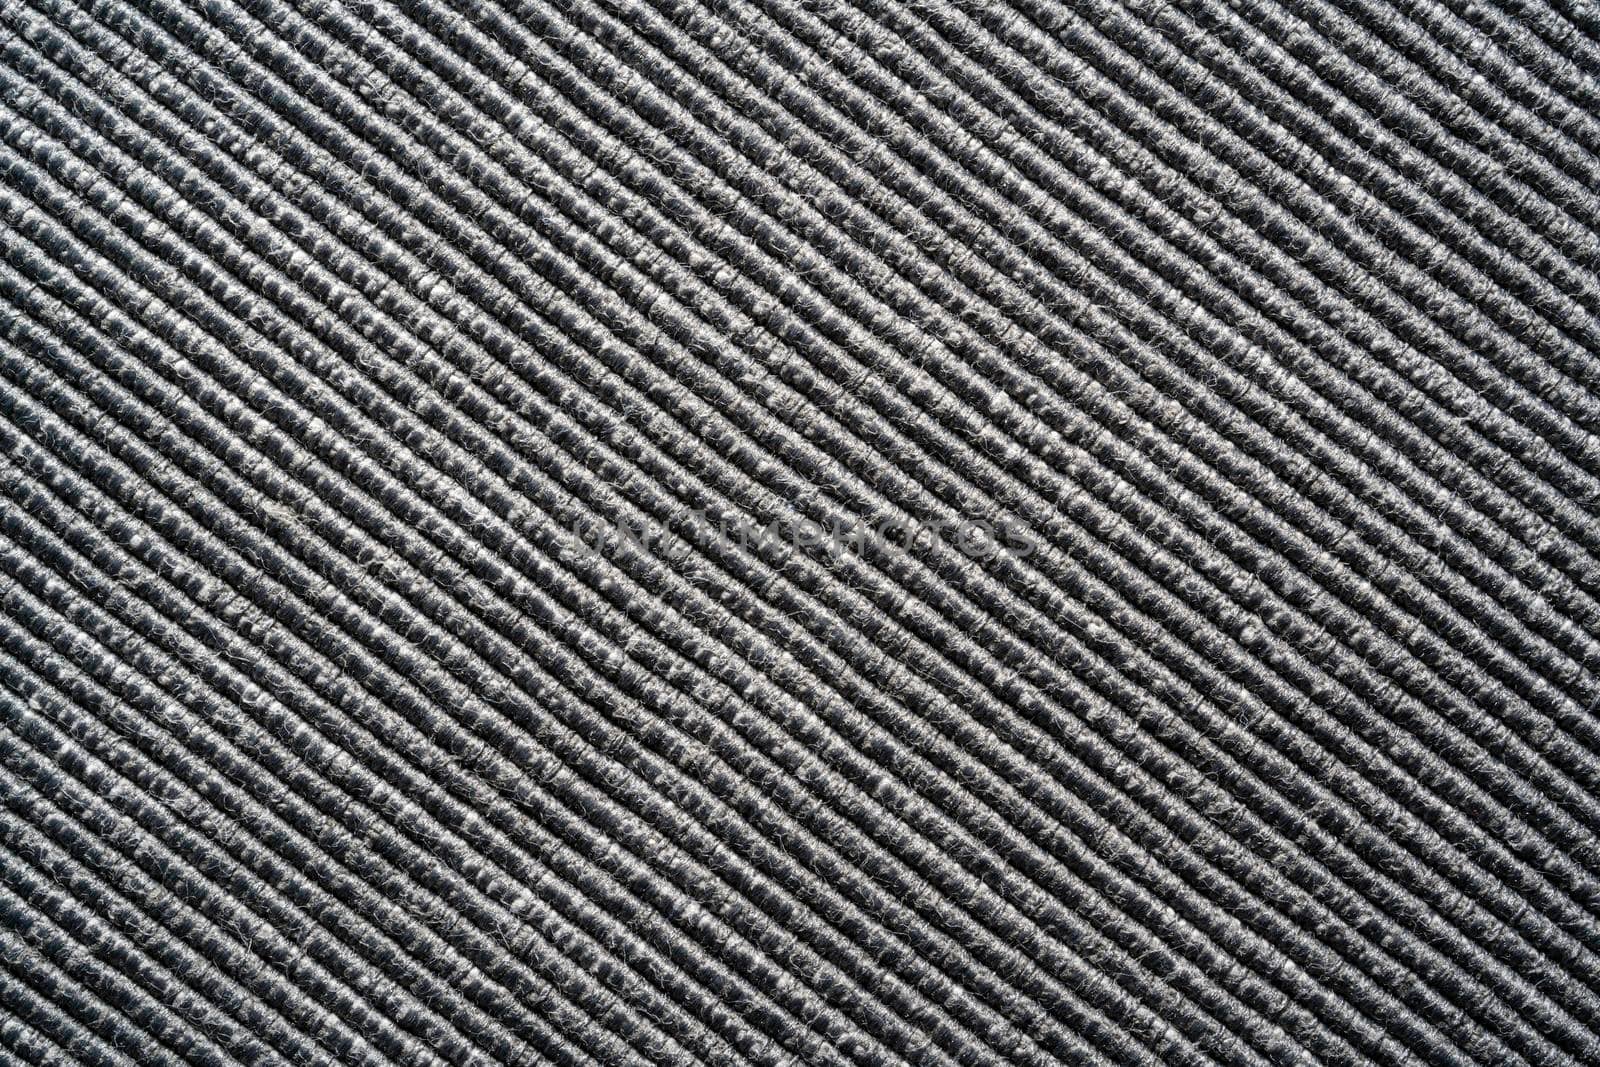 the texture of a tablecloth